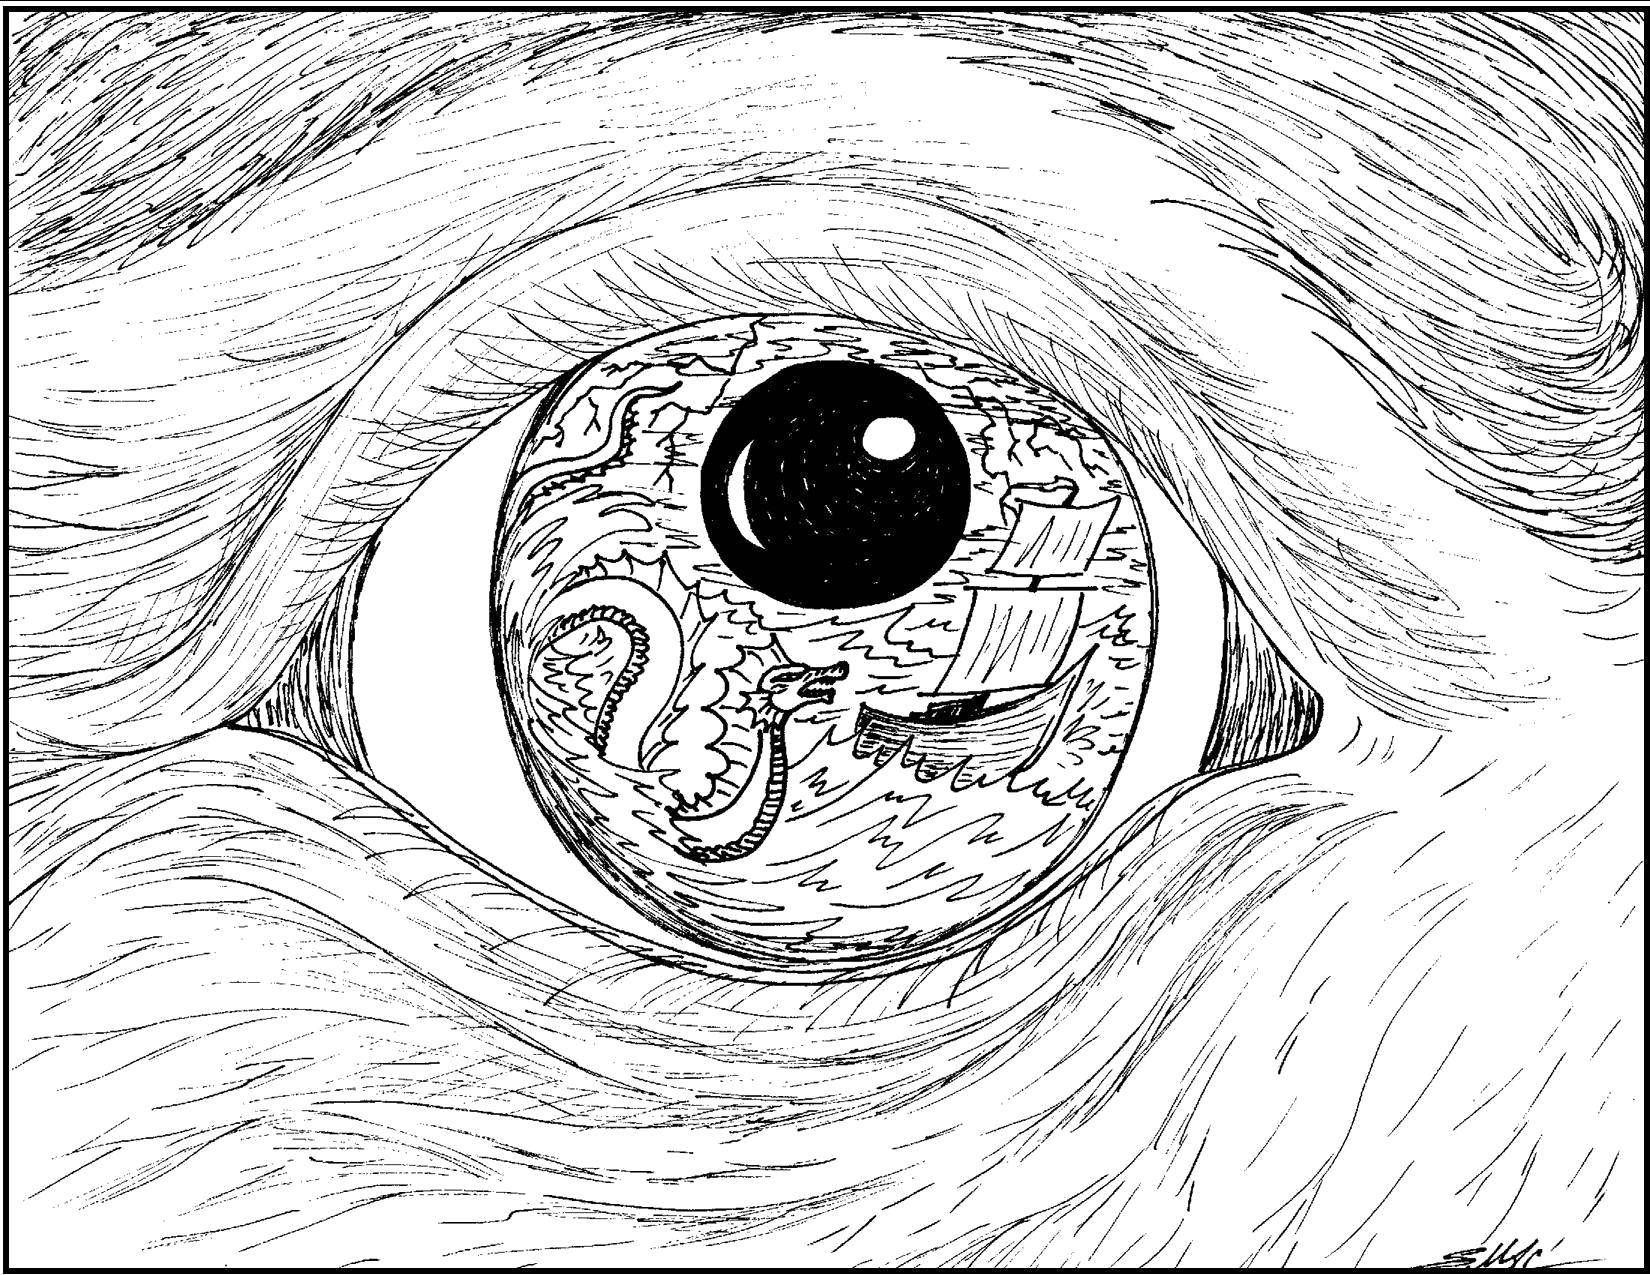 Coloring The dragon in the eye. Category Dragons. Tags:  Dragons.